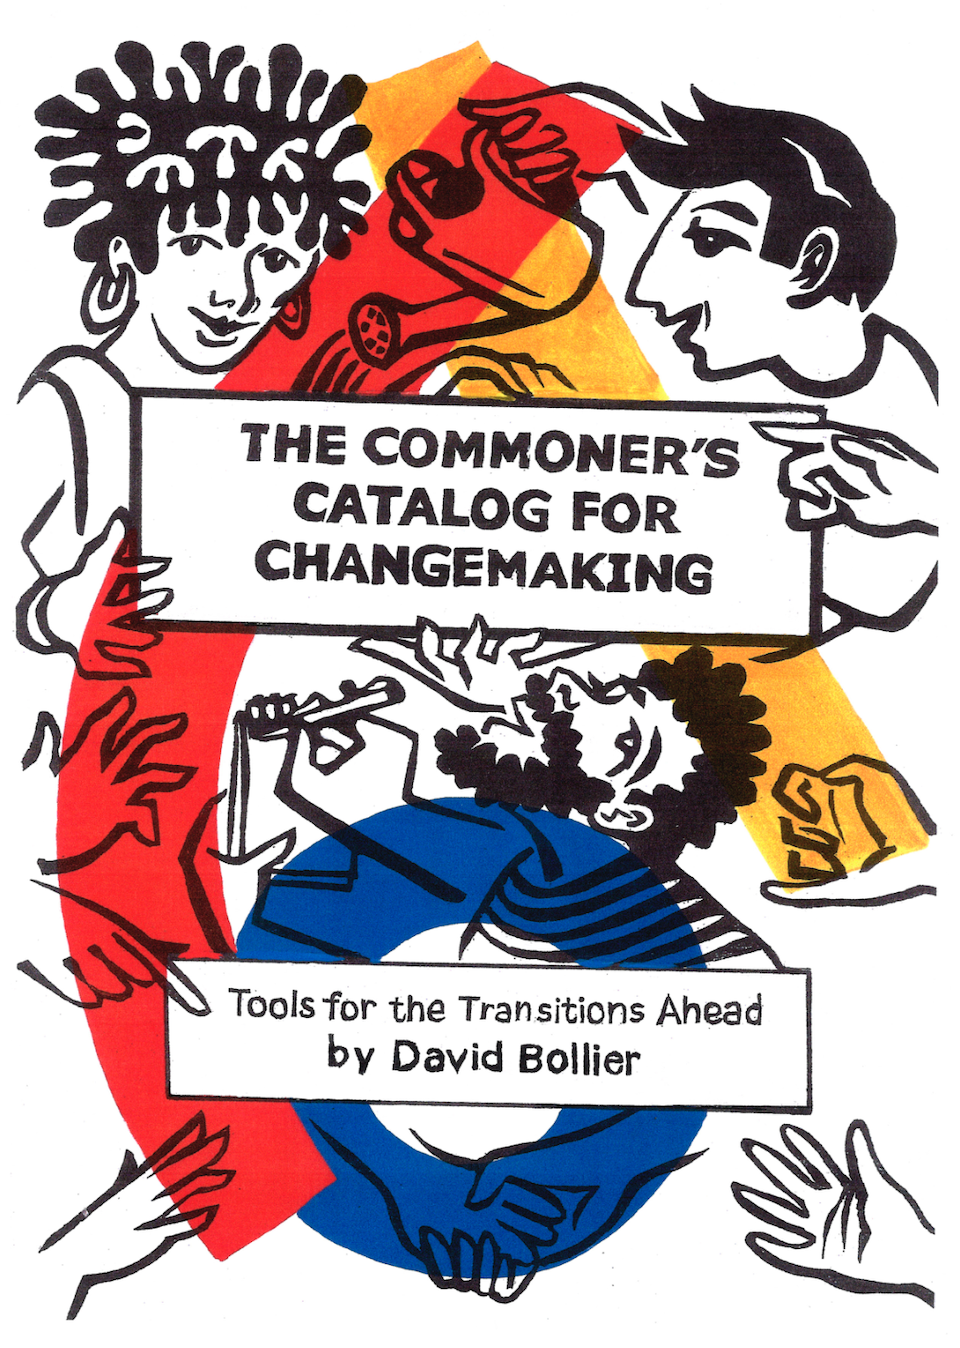 The Commoner's Catalog for Changemaking. Tools for the transition ahead, by David Bollier.